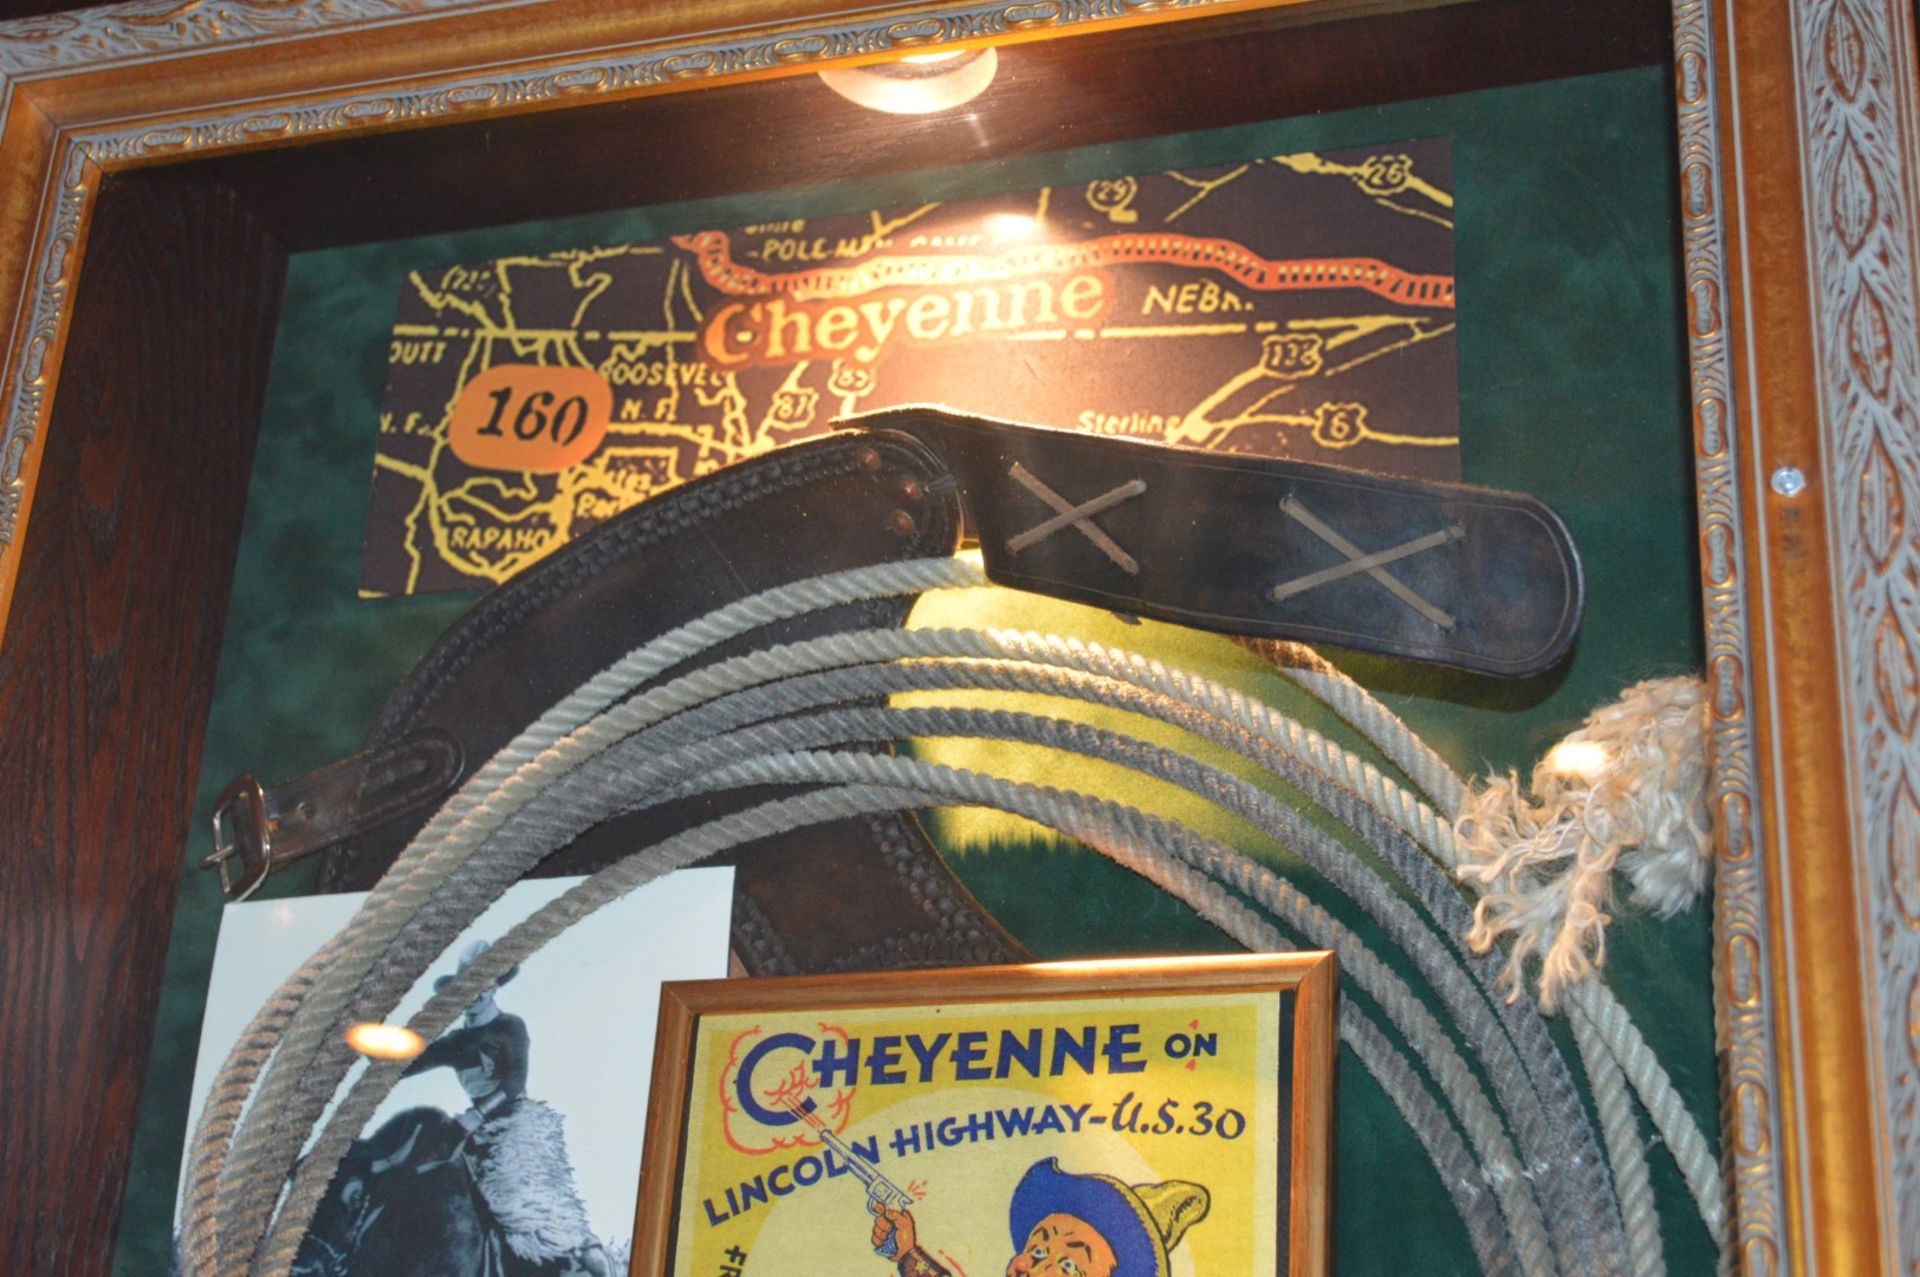 1 x Americana Wall Mounted Illuminated Display Case - CHEYENNE LINCOLD HIGHWAY - Includes Various - Image 6 of 6